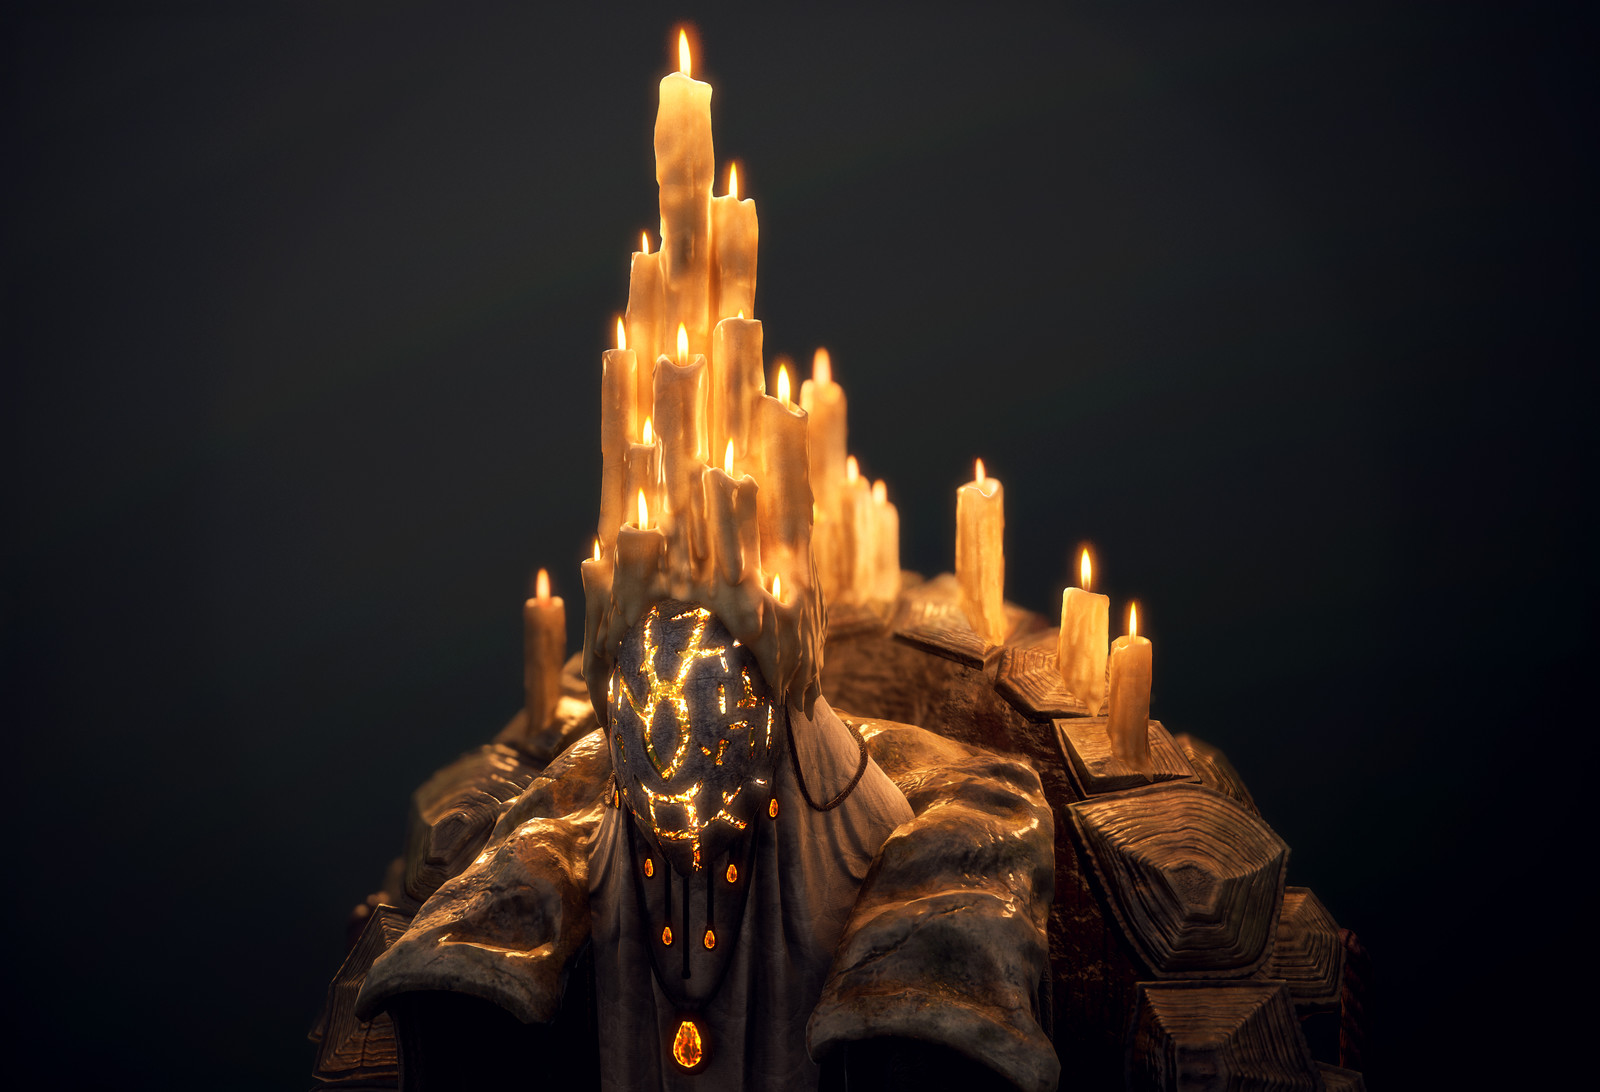 Render with just the candle lights on